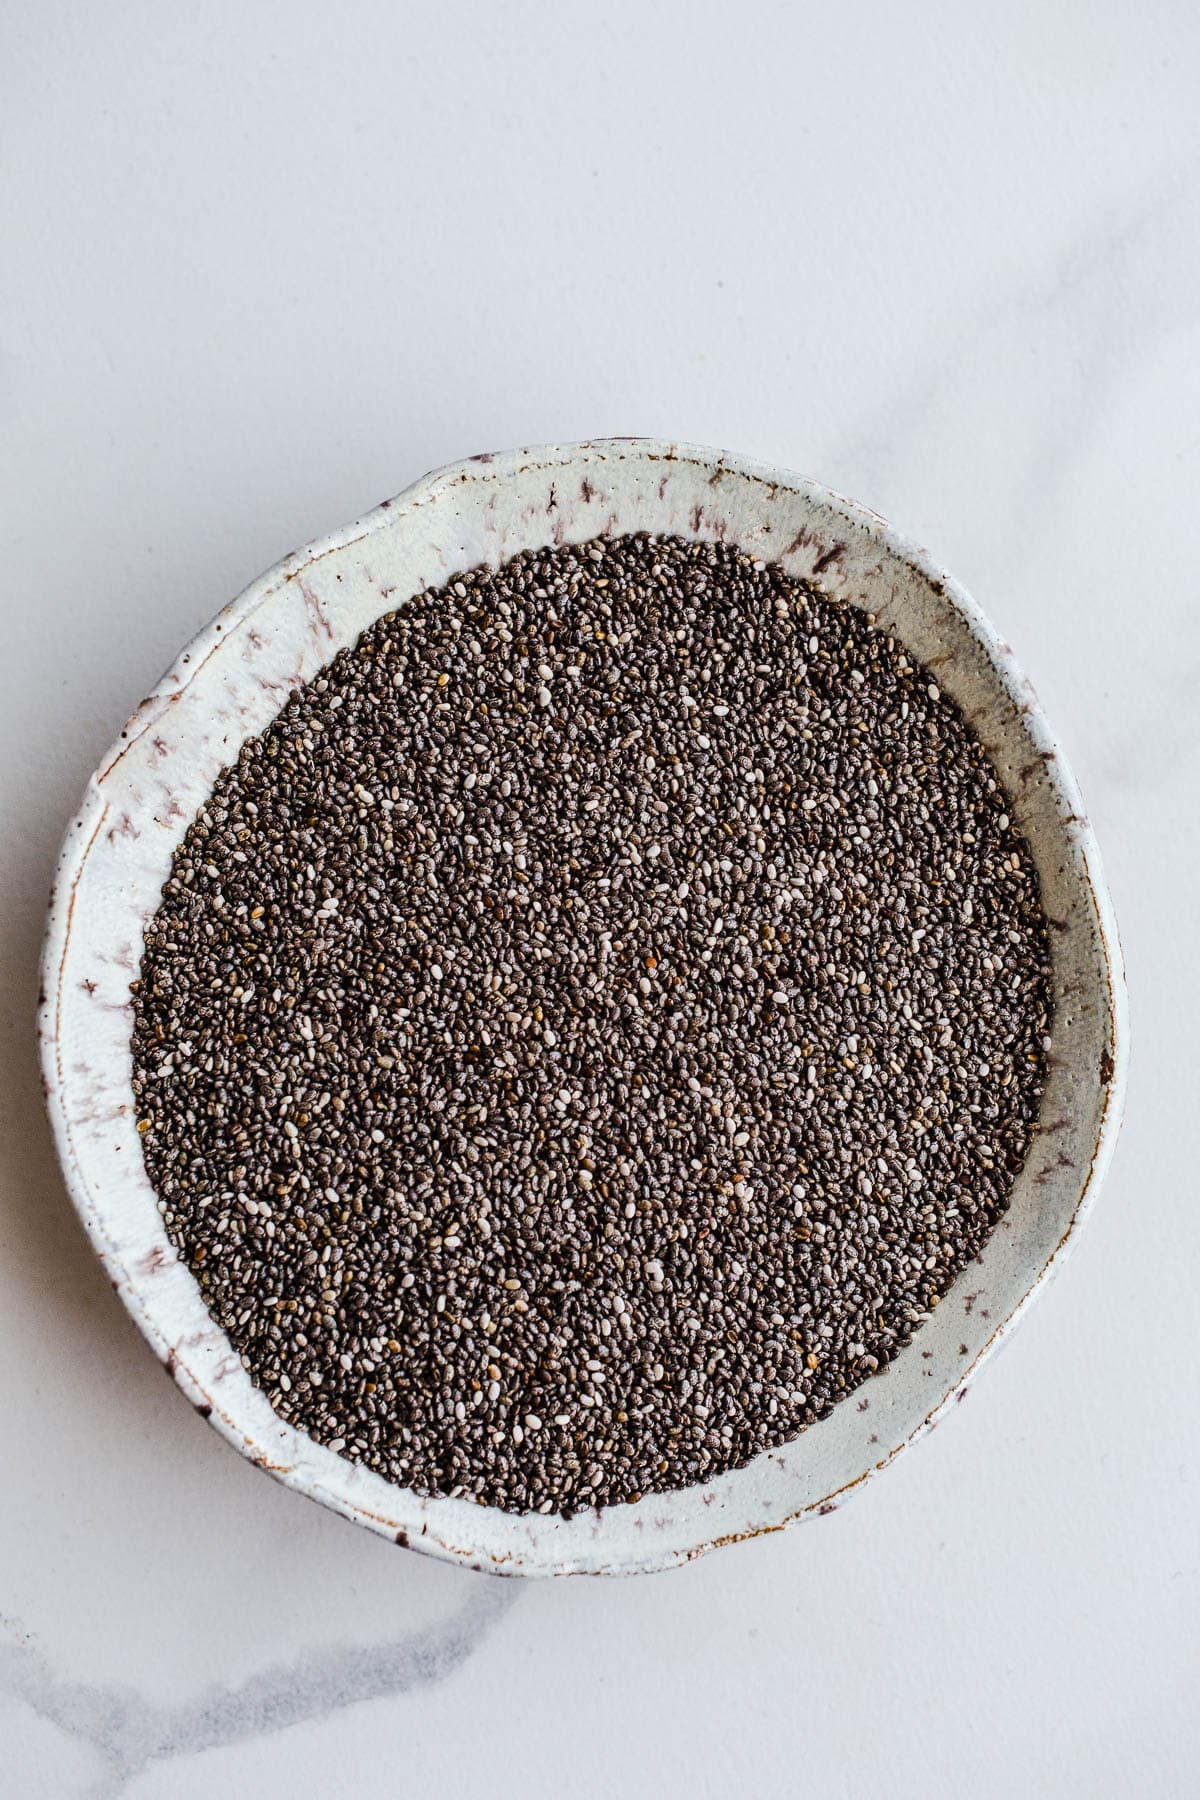 A small white bowl containing black chia seeds.